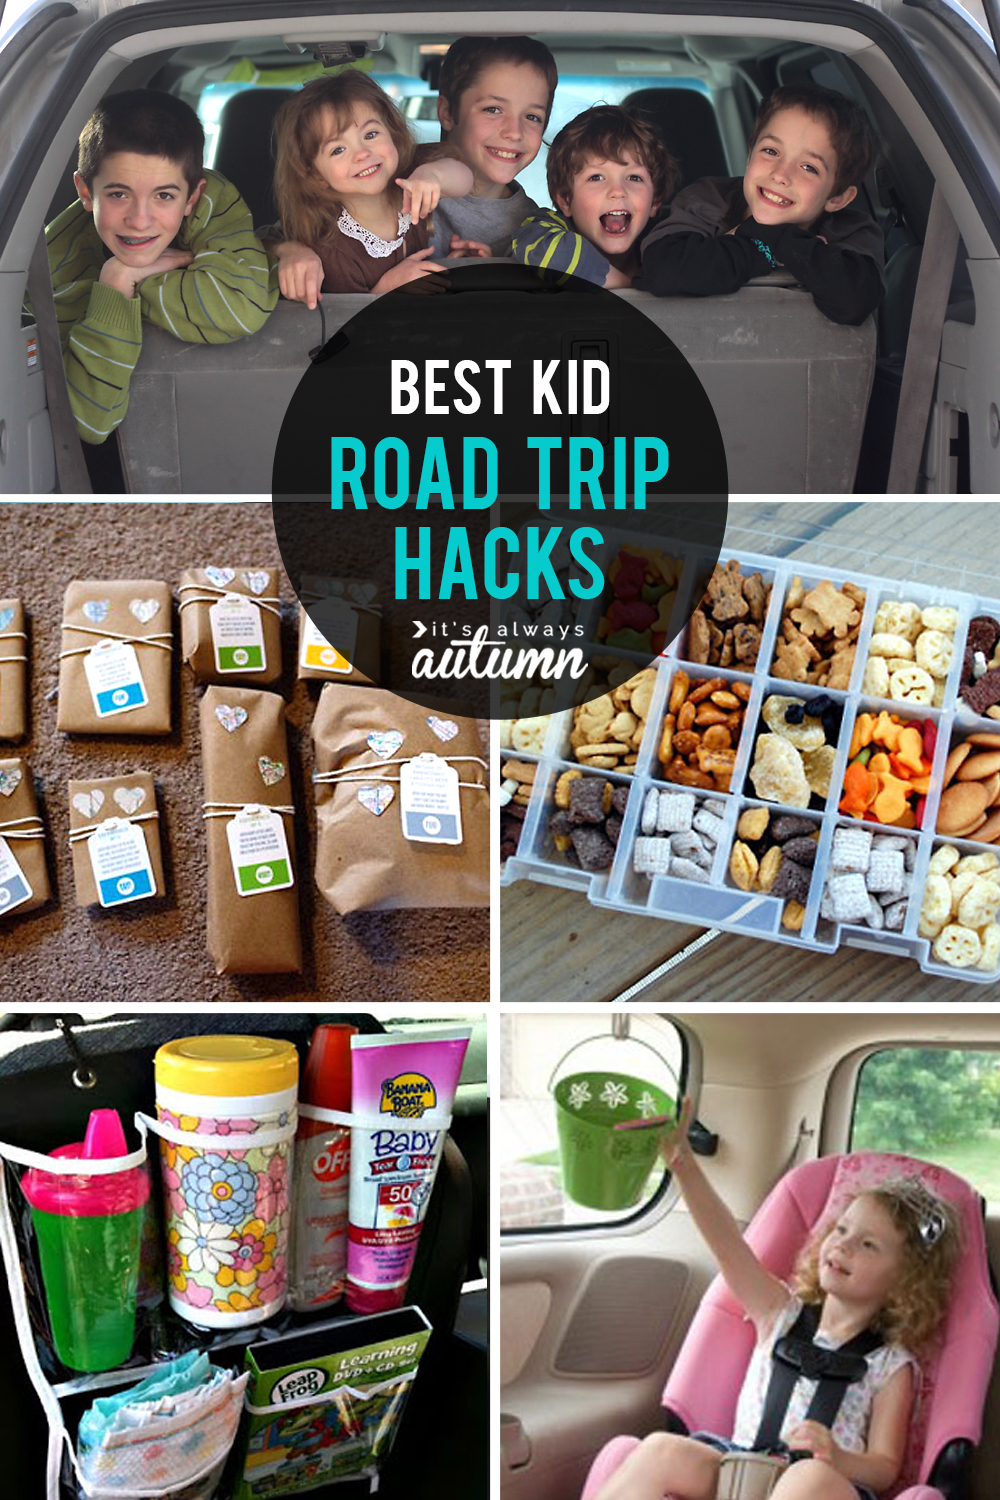 25+ Awesome Road Trip Activities For Kids - Kids Are A Trip™